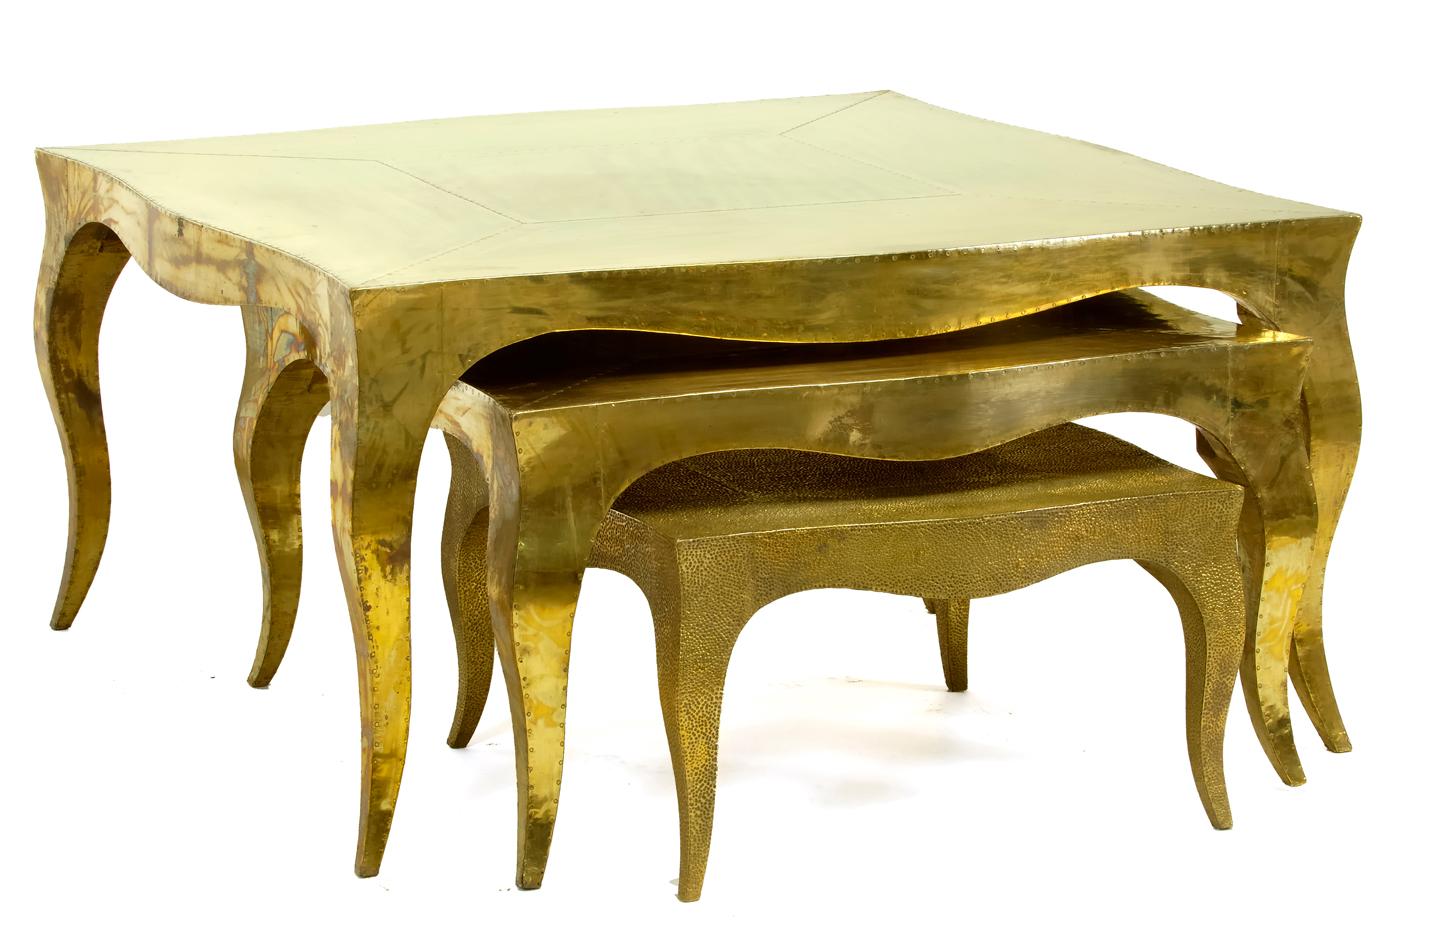 Louise Art Deco Industrial and Work Tables Mid. Hammered White Bronze by Paul Ma For Sale 5